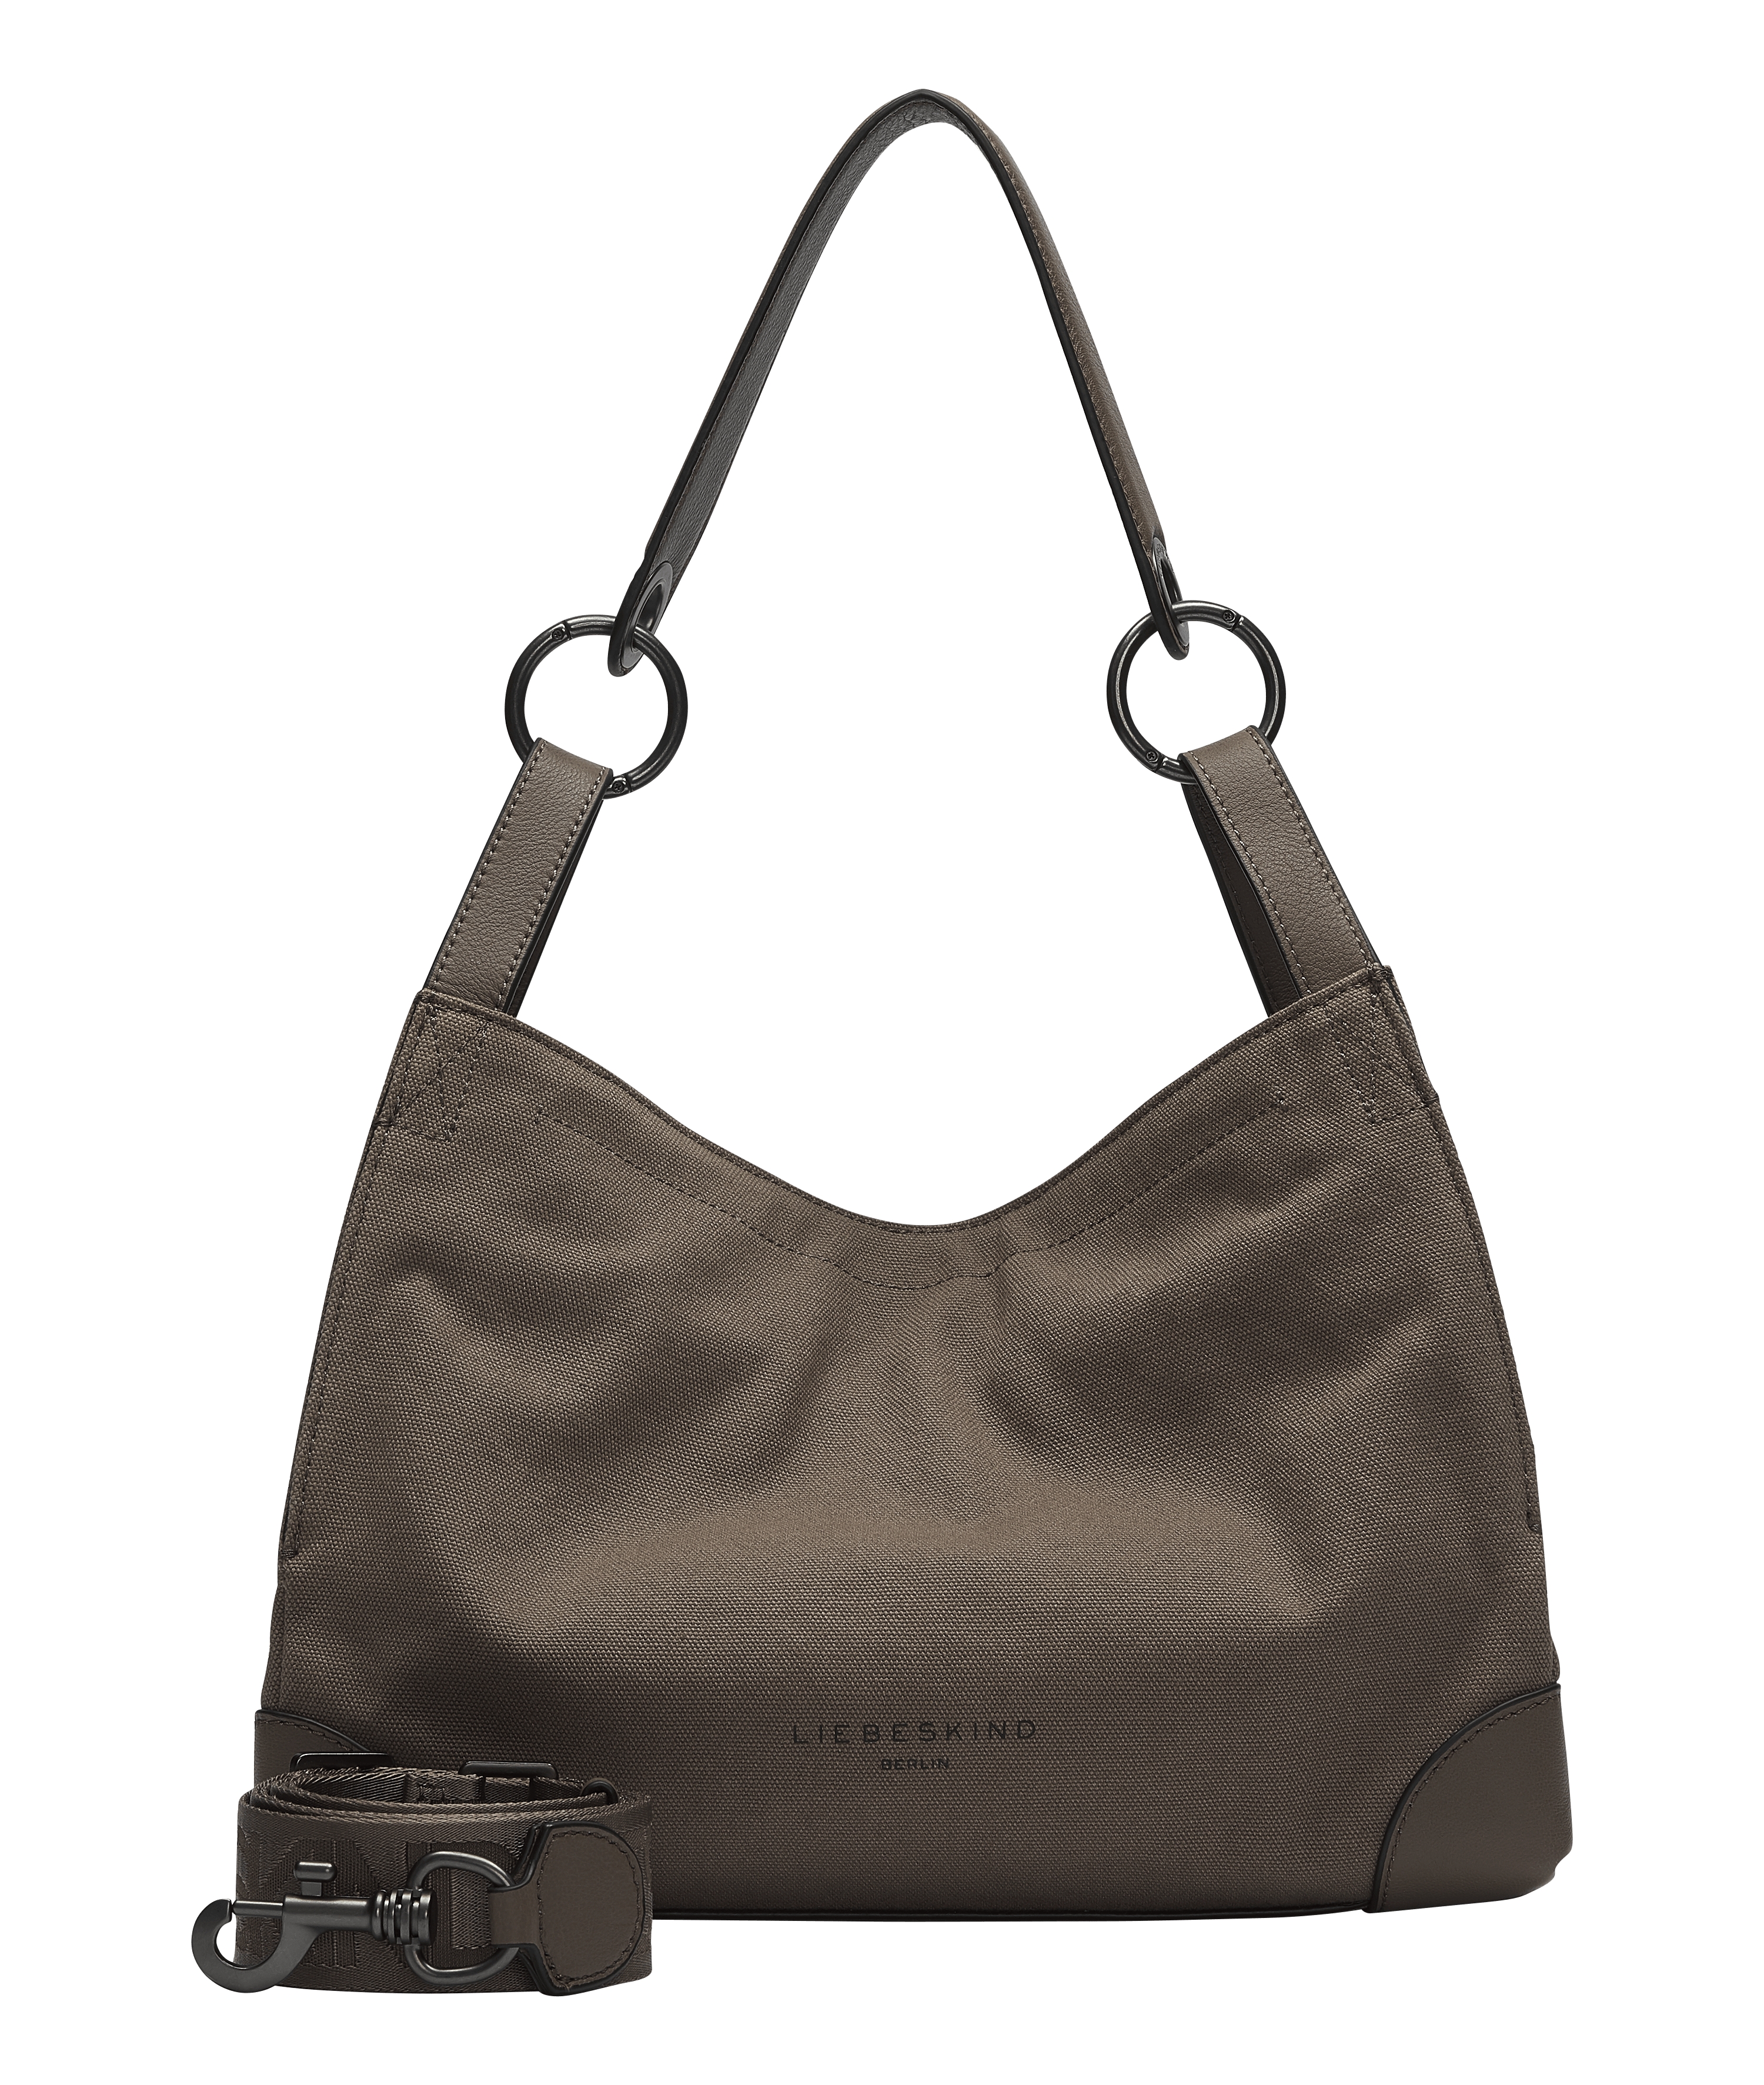 Liebeskind Audre Hobo M